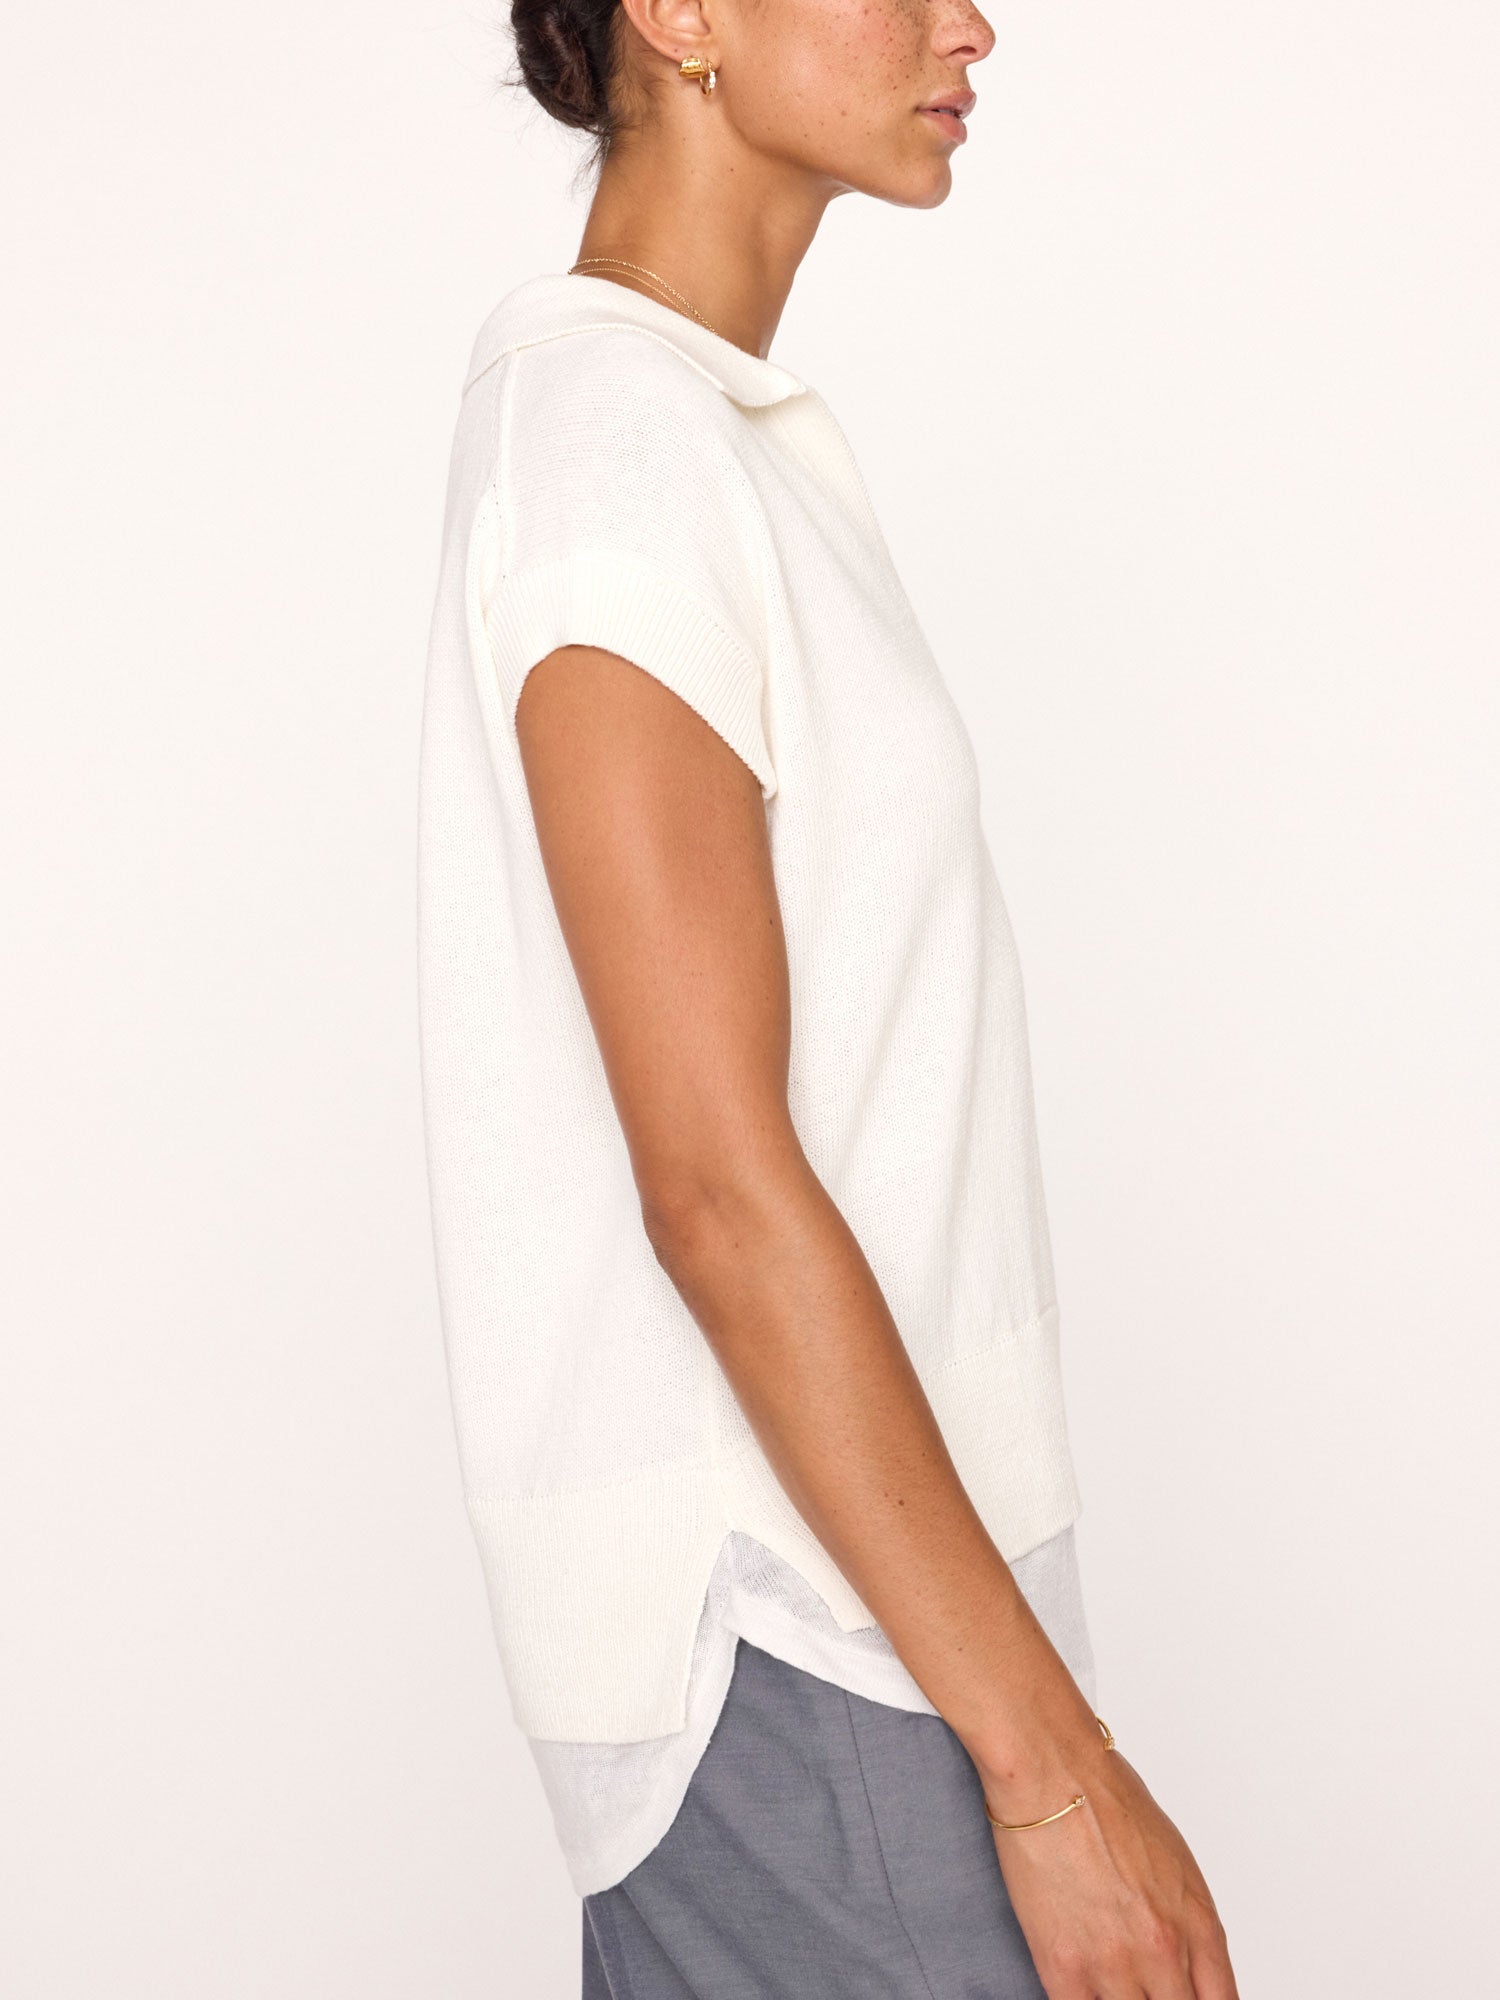 Jaia layered polo short sleeve white sweater side view 2